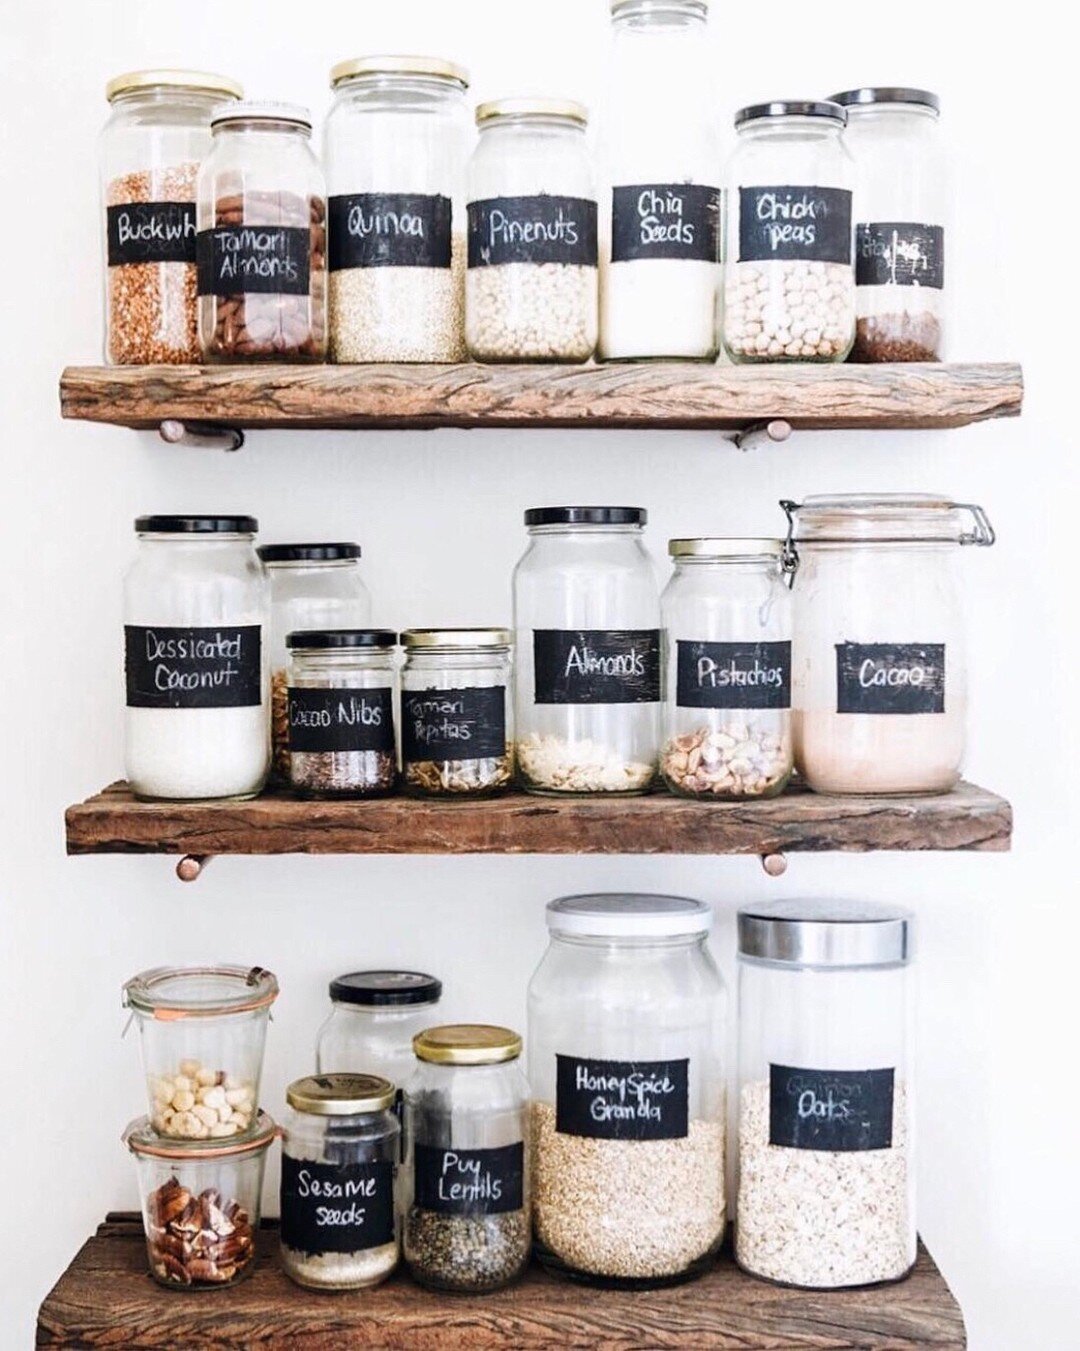 Pantry goals ✨ I worked with a professional organizer once who inspired me to transfer all of my dry goods in labelled jars. So simple, yet game changing! Who else does this?!